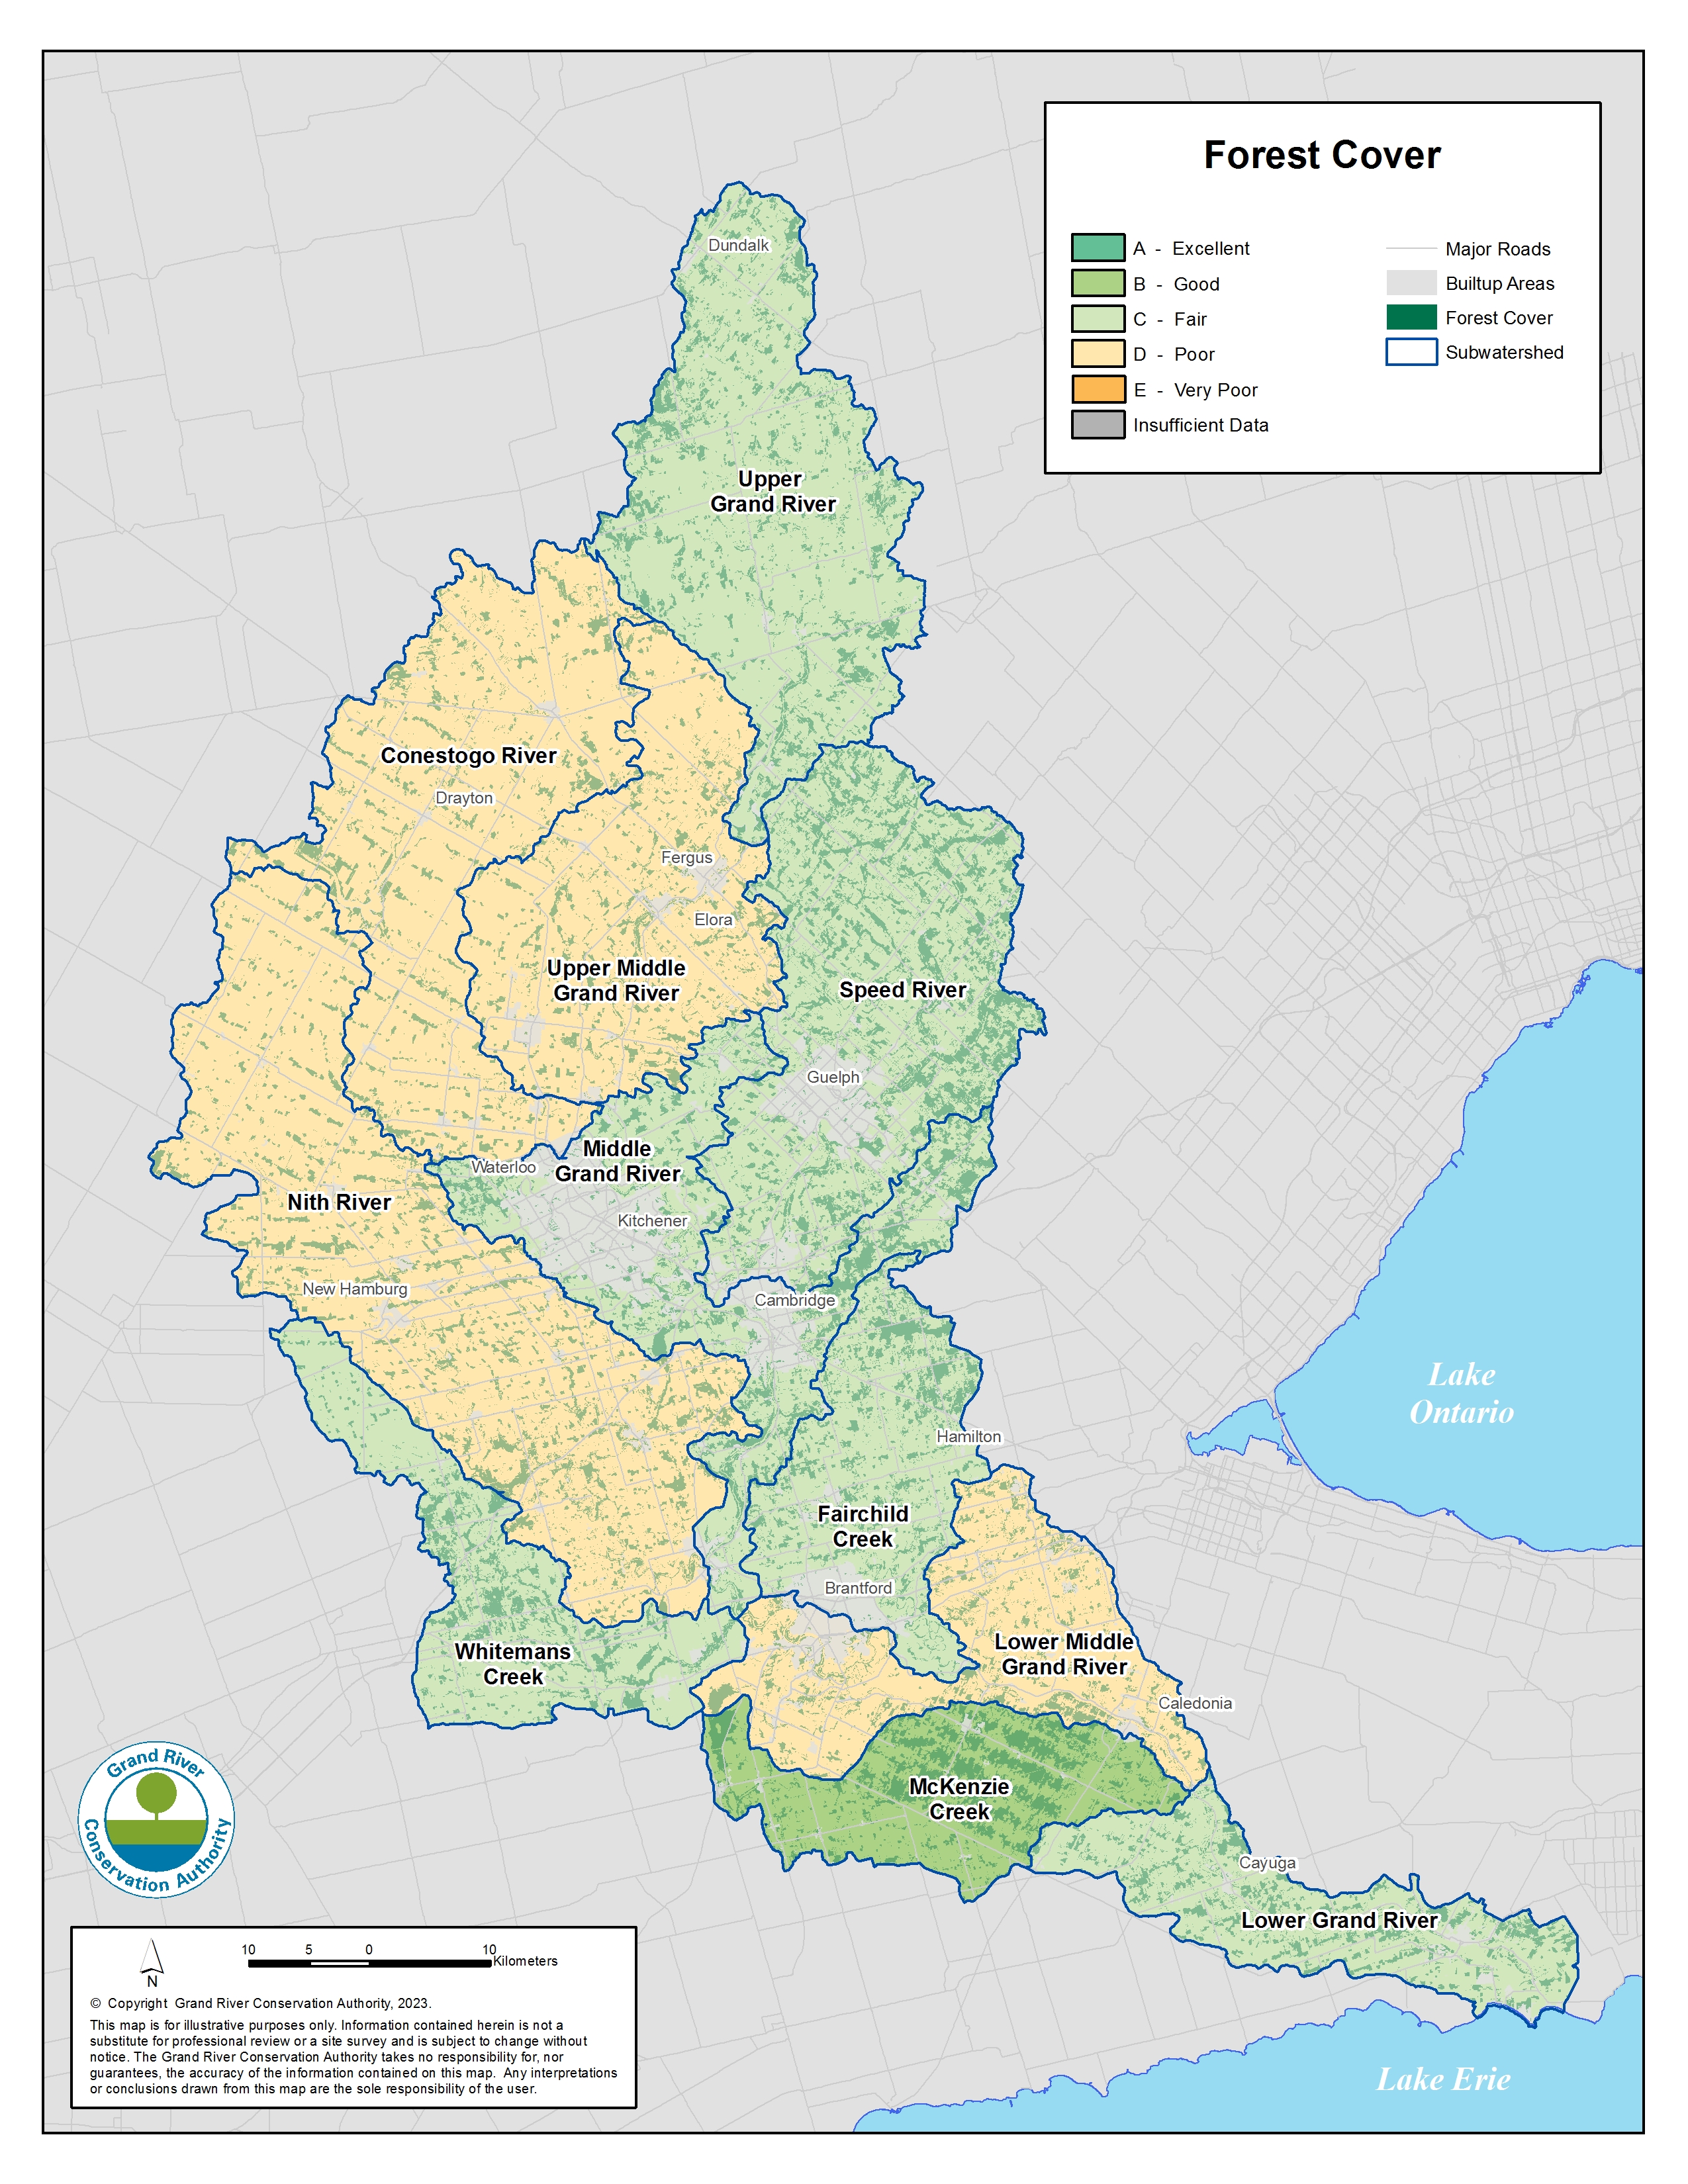 A map of letter grades for forest cover. The McKenzie Creek subwatershed has a grade of B. Fairchild Creek, Upper, Middle and Lower Grand River, Speed River, and Whiteman's Creek subwatersheds have C grades. All other areas have D grades.  